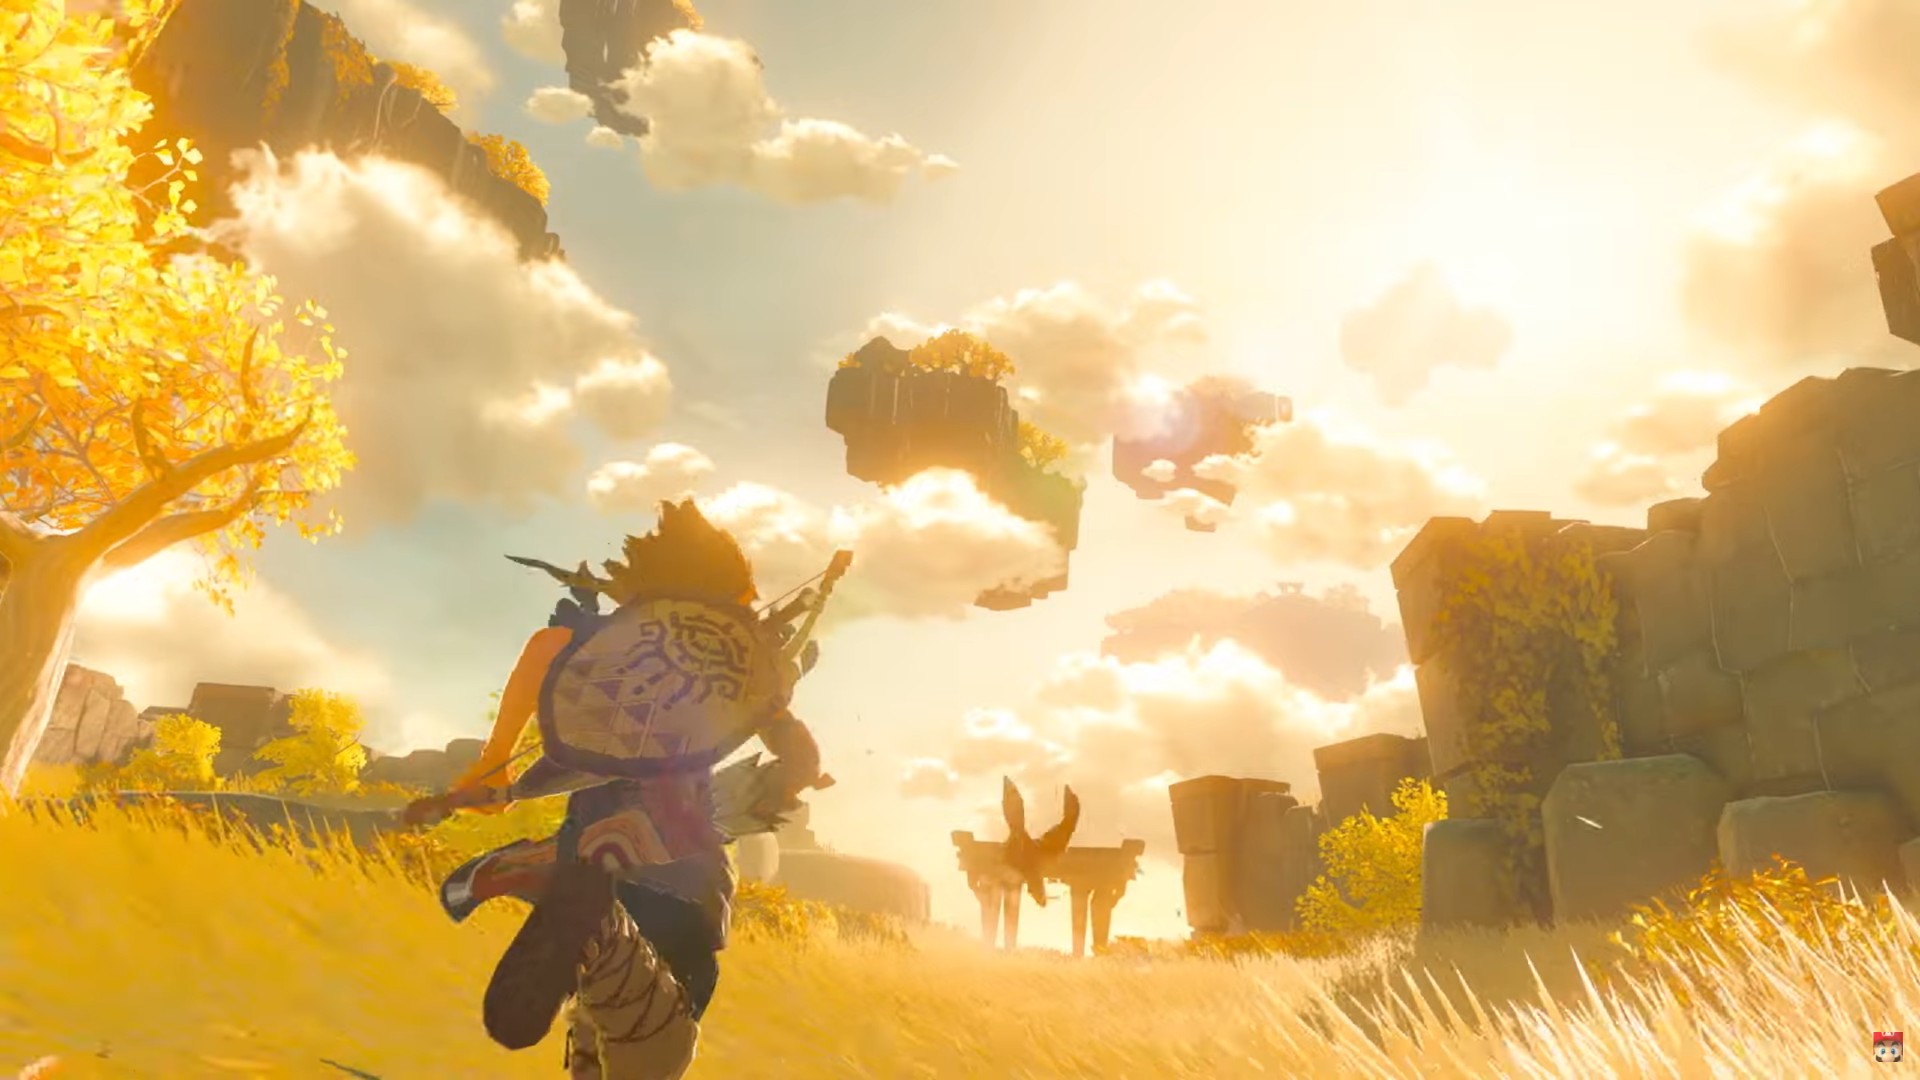 This Zelda: Breath of the Wild multiplayer mod is so good that